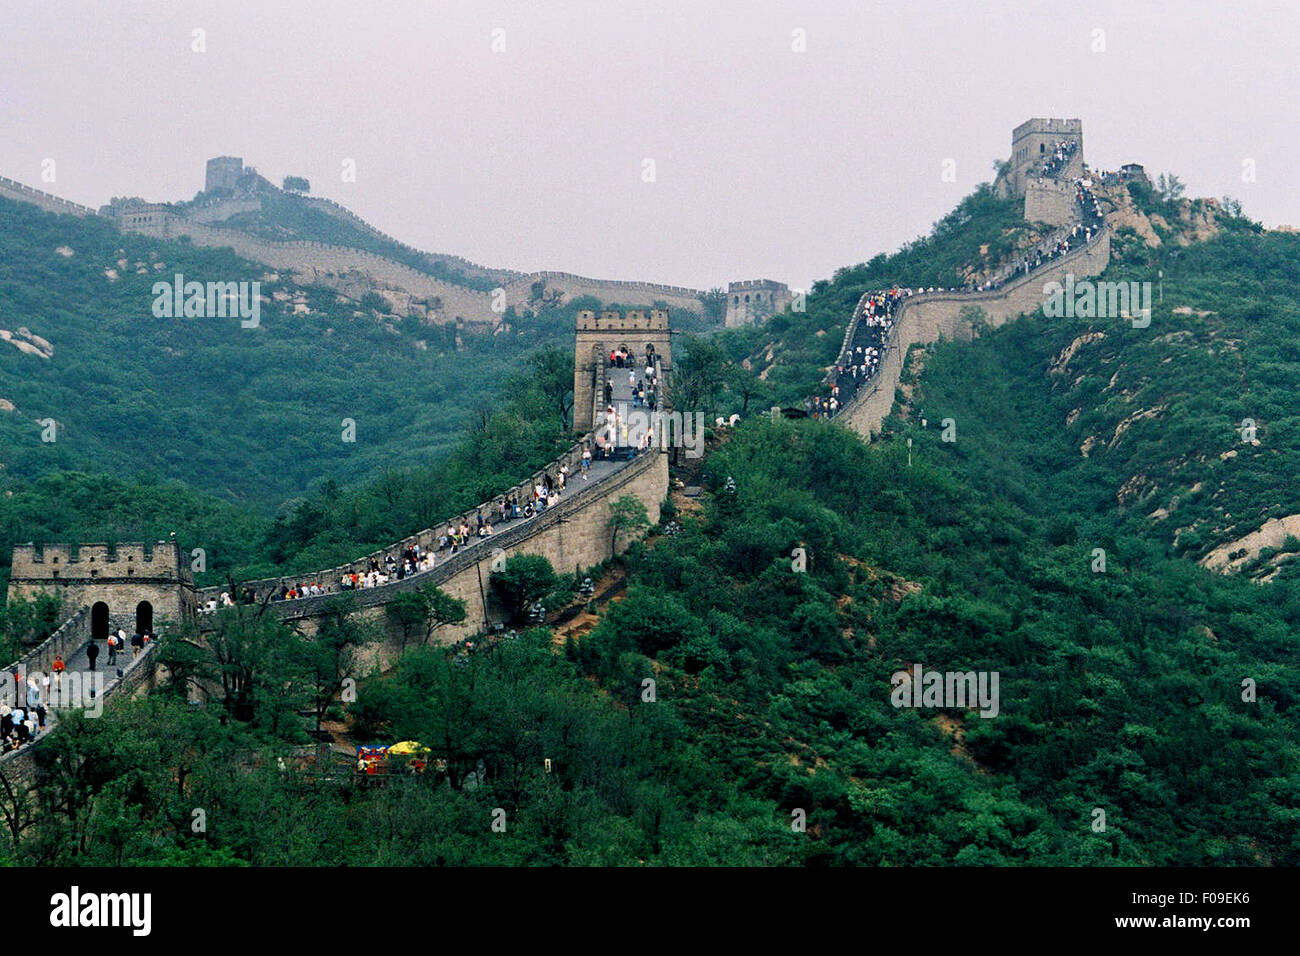 Section of the Great Wall, China Stock Photo